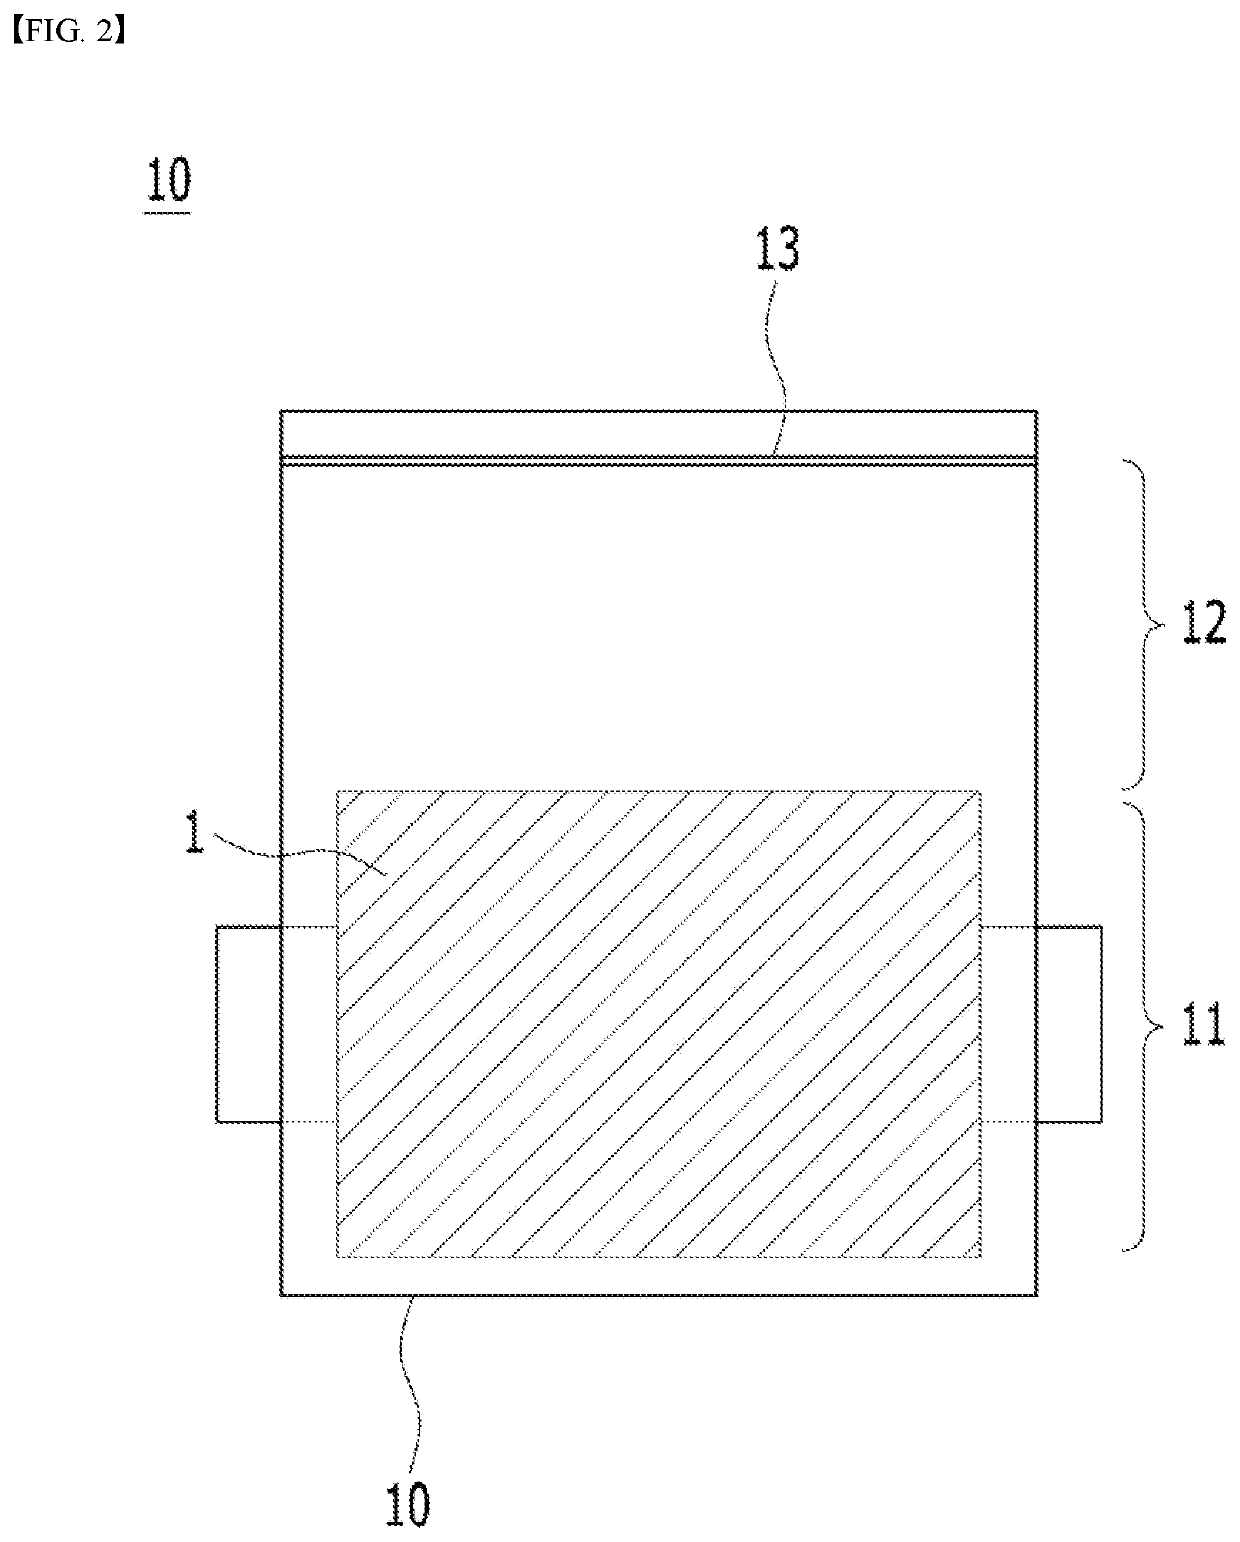 Lithium secondary battery case for suppressing deformation of electrode assembly